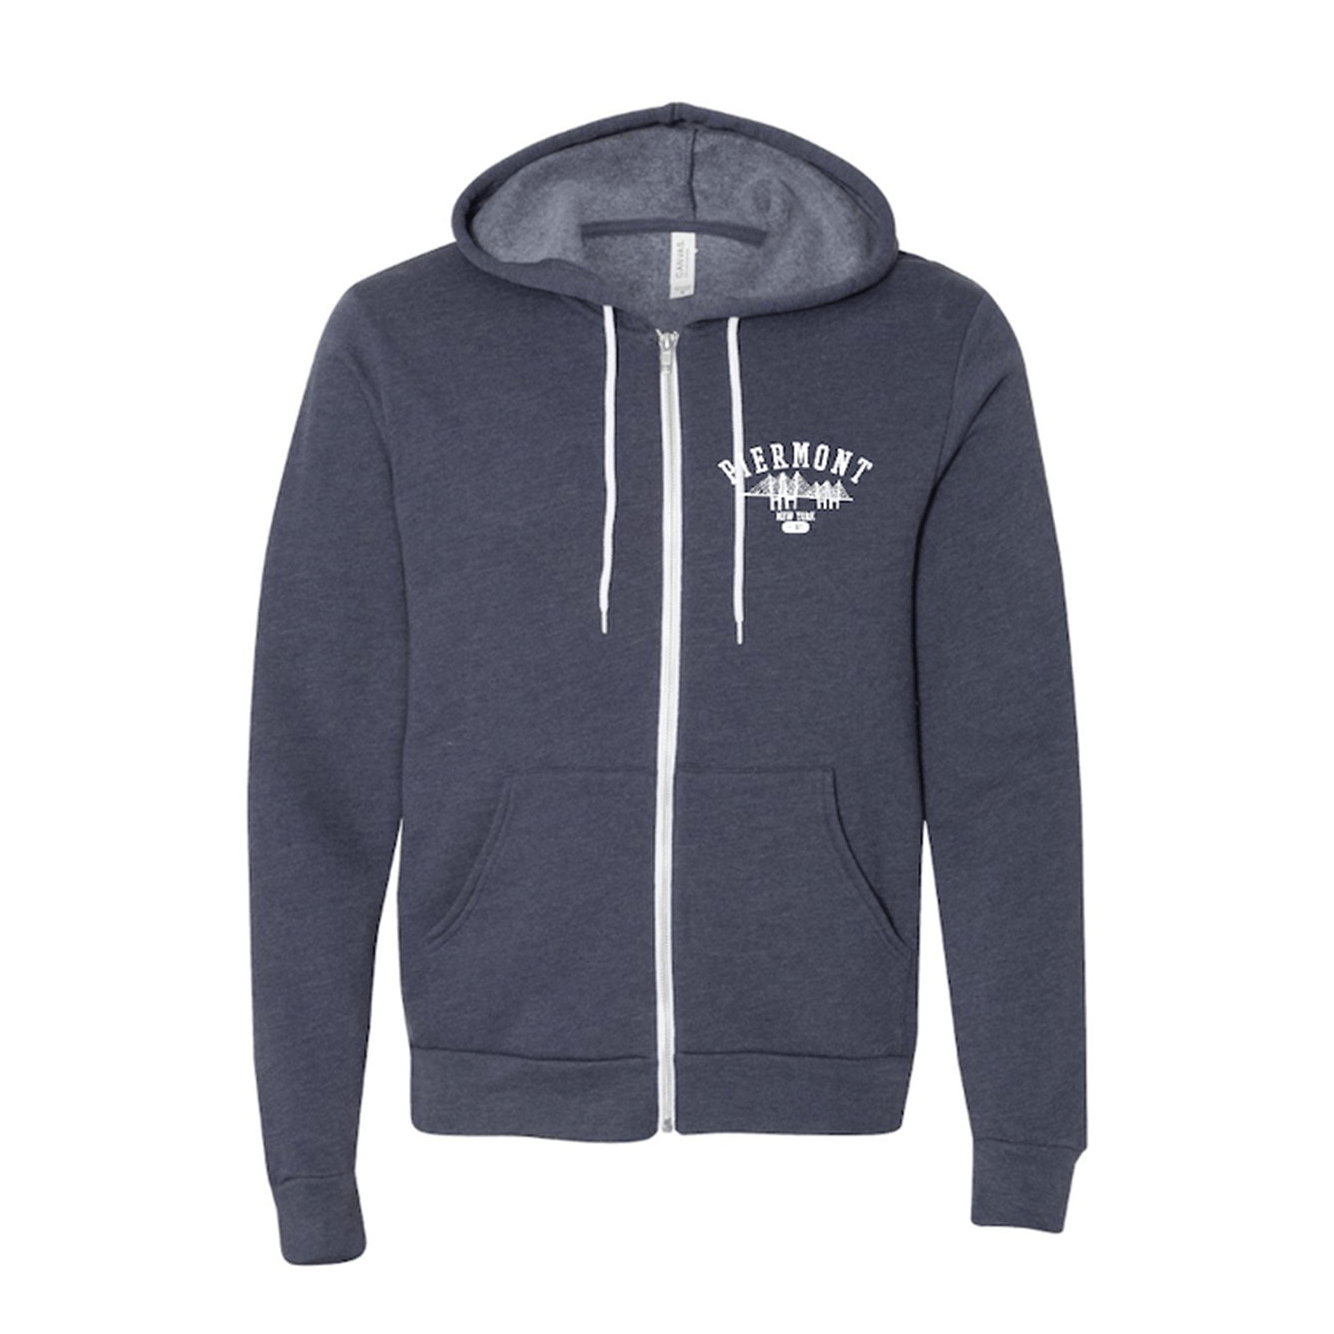 Spyfire Hoody - Midnight Blue - 6th Ave Outfitters Co-op